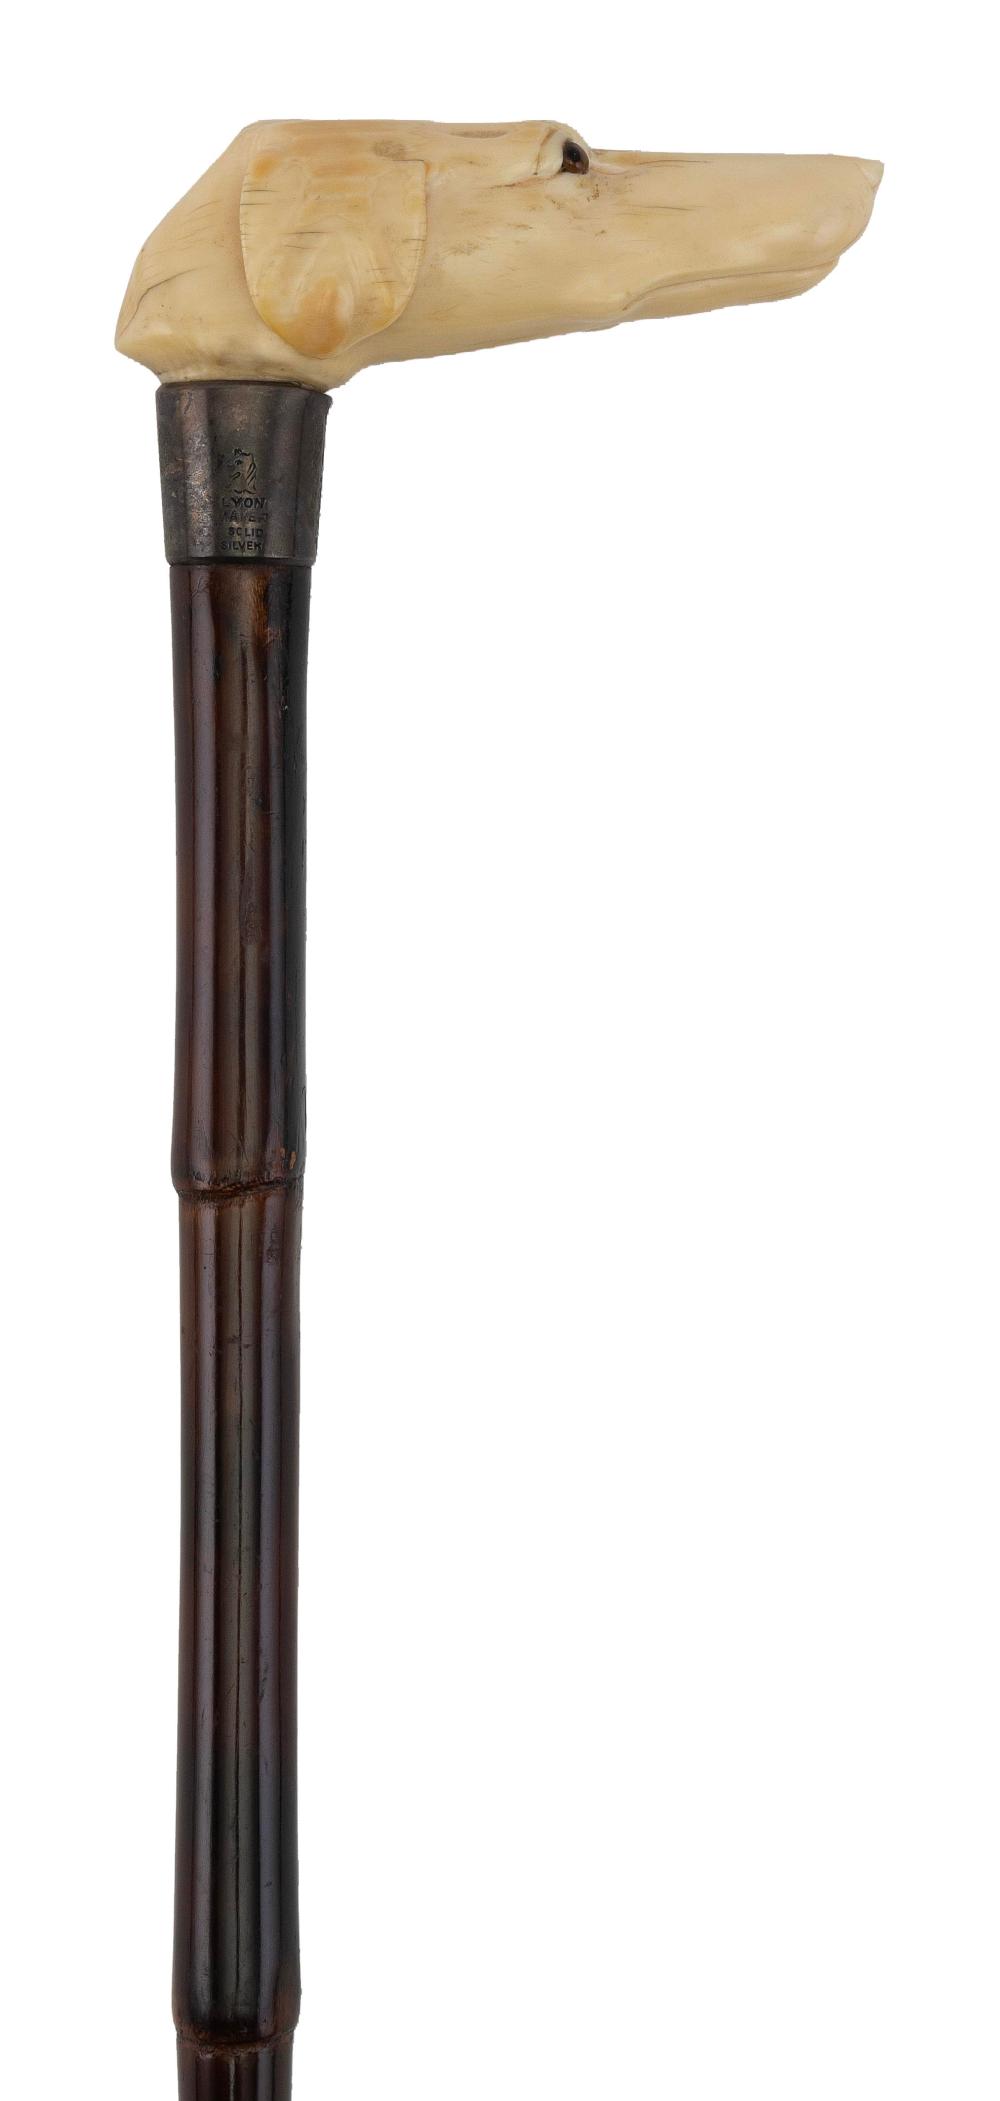 GREYHOUND CANE LATE 19TH/EARLY